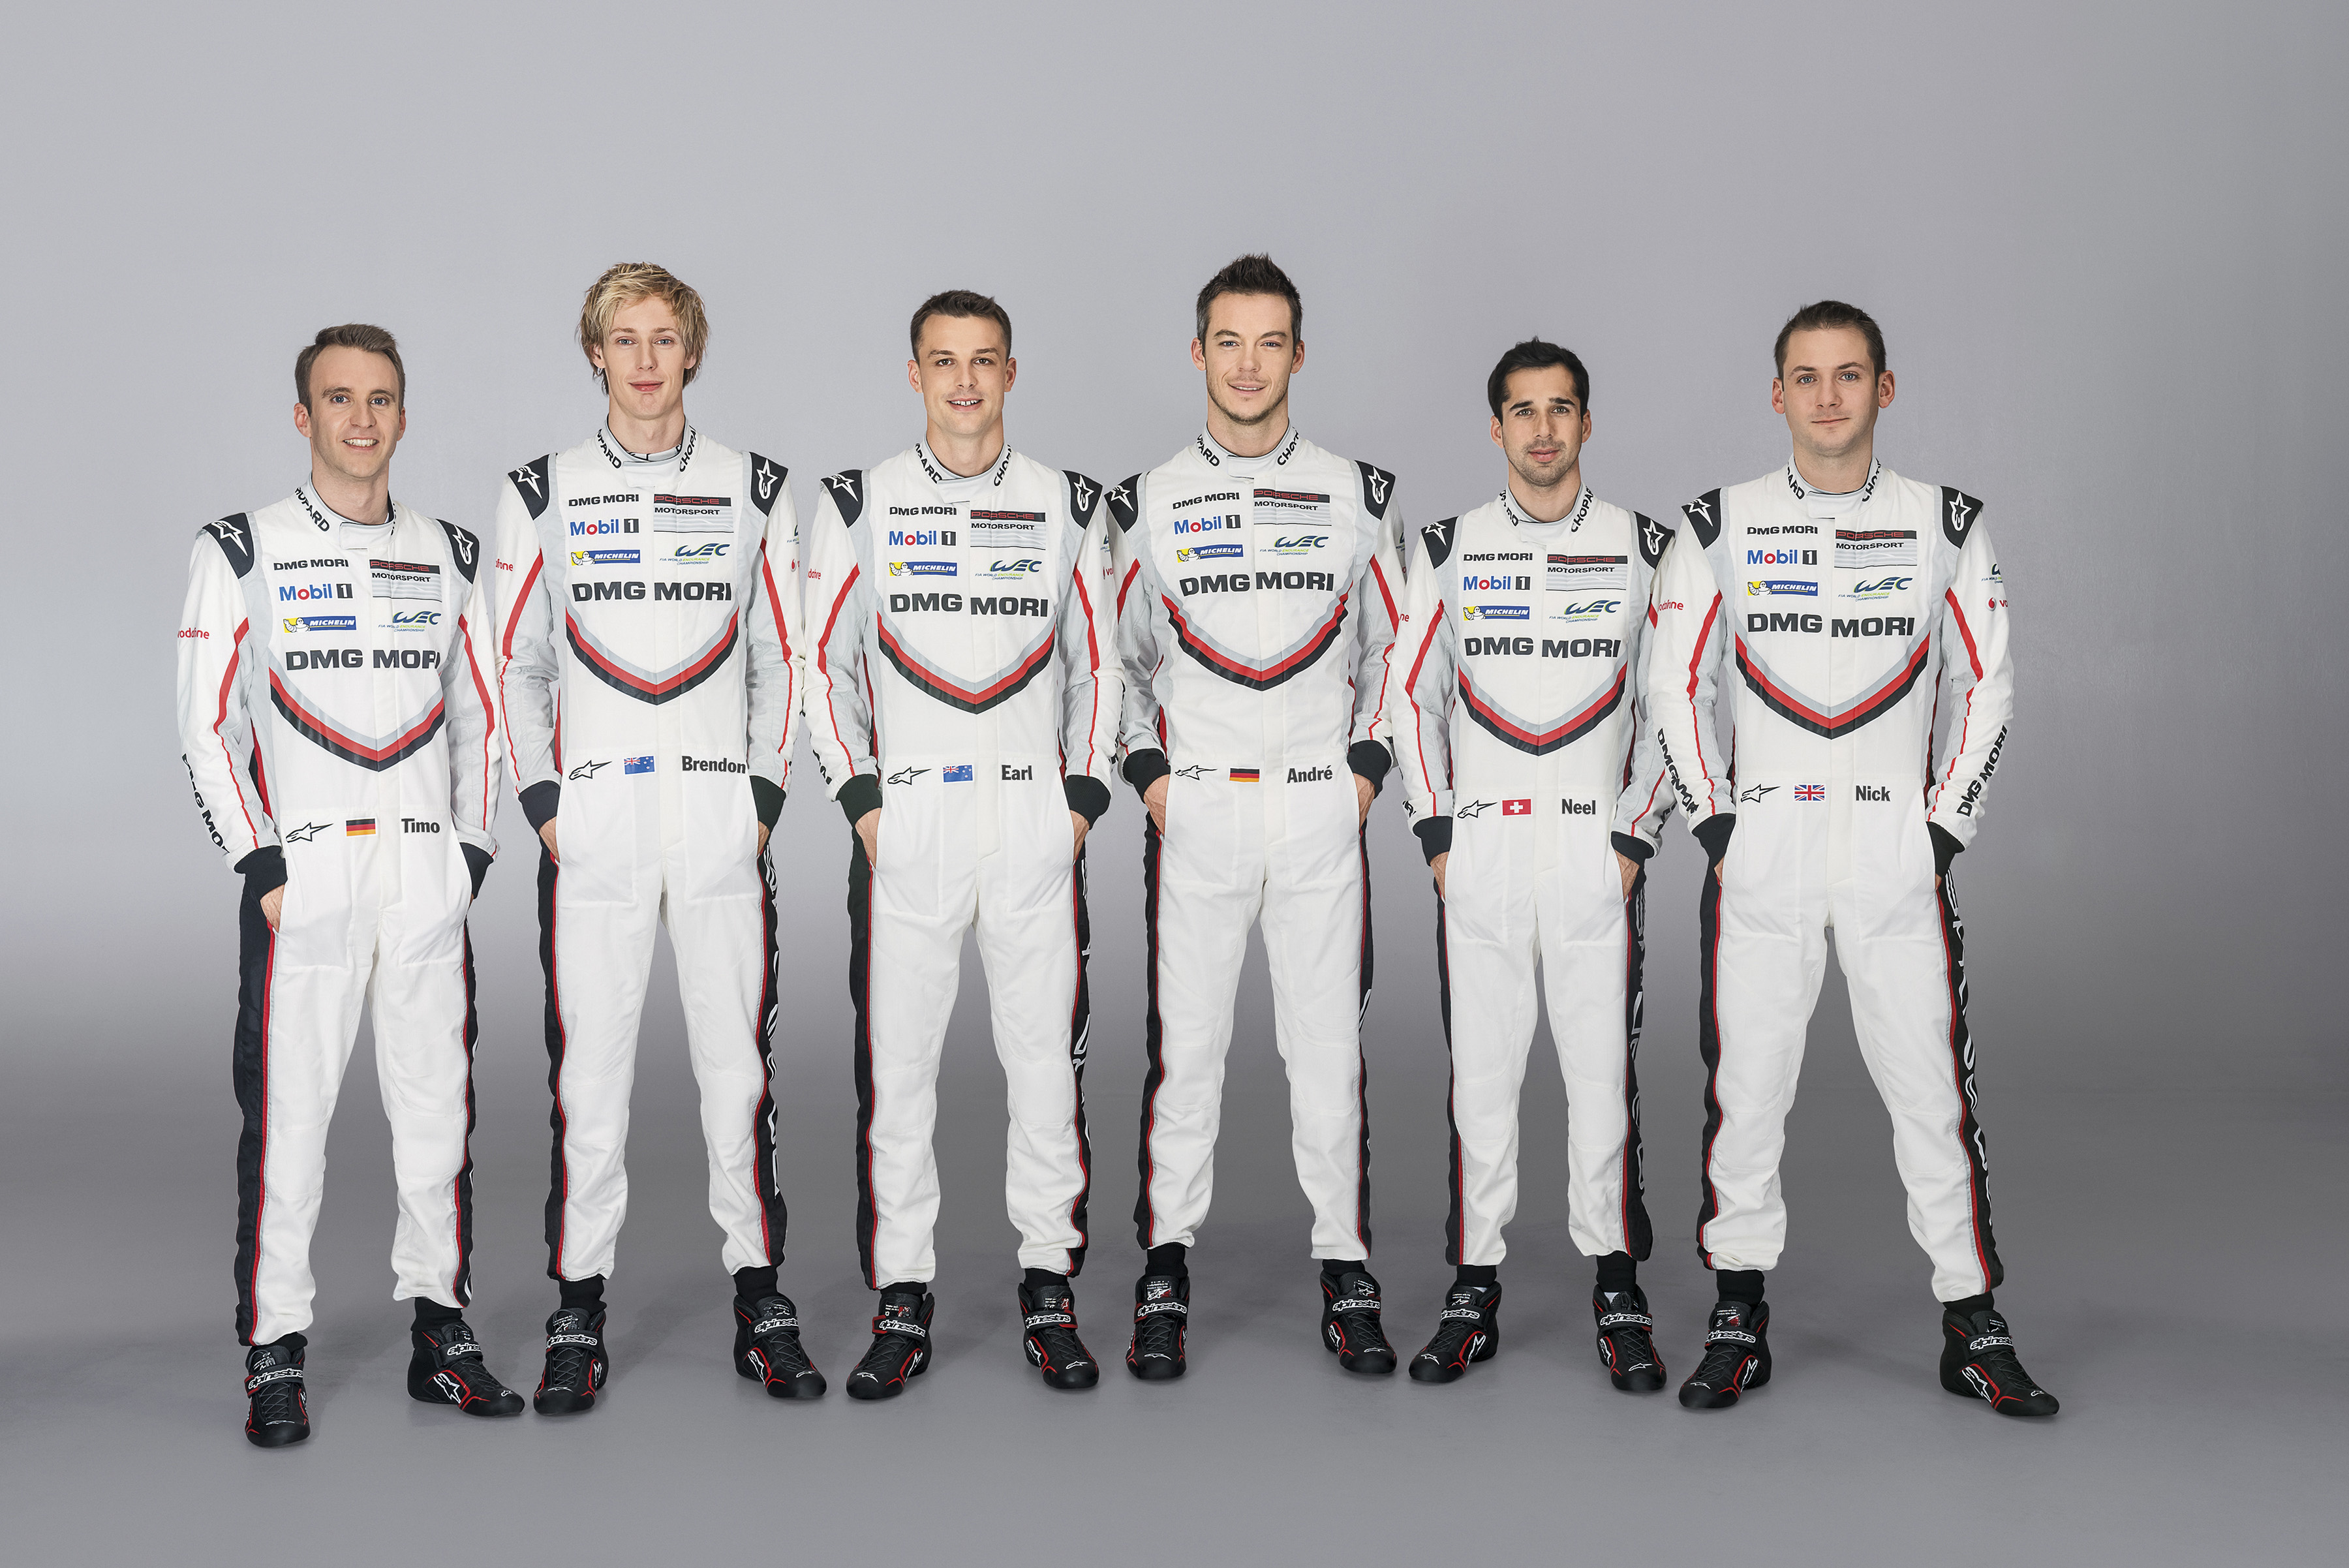 Porsche presents the 919 Hybrid and the team in Monza